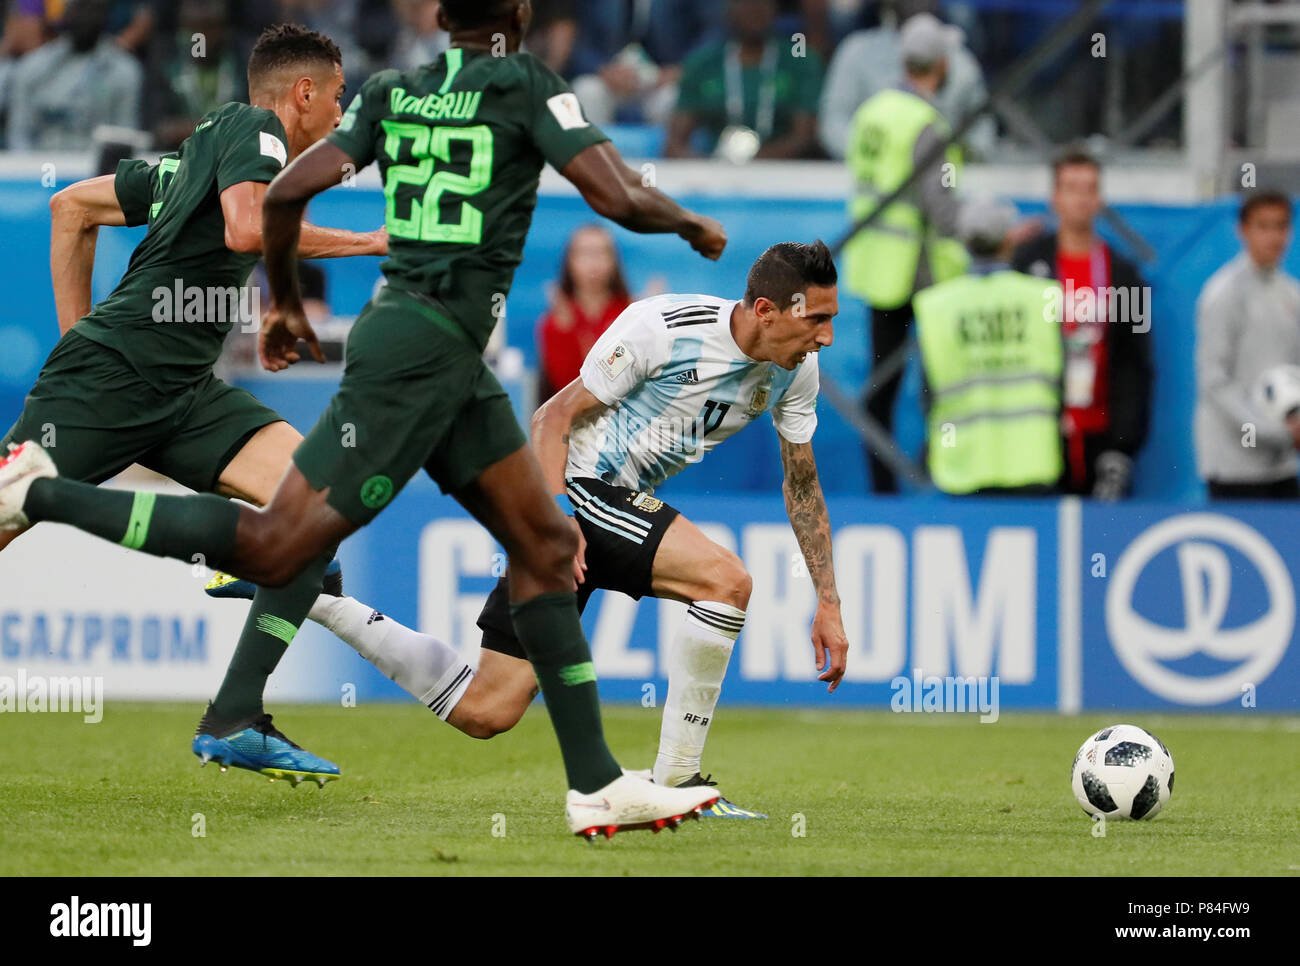 SAINT PETERSBURG, RUSSIA - JUNE 26: Angel Di Maria (R) of Argentina national team vies for the ball with Leon Balogun (L) and Kenneth Omeruo of Nigeria national team during the 2018 FIFA World Cup Russia group D match between Nigeria and Argentina at Saint Petersburg Stadium on June 26, 2018 in Saint Petersburg, Russia. (MB Media) Stock Photo